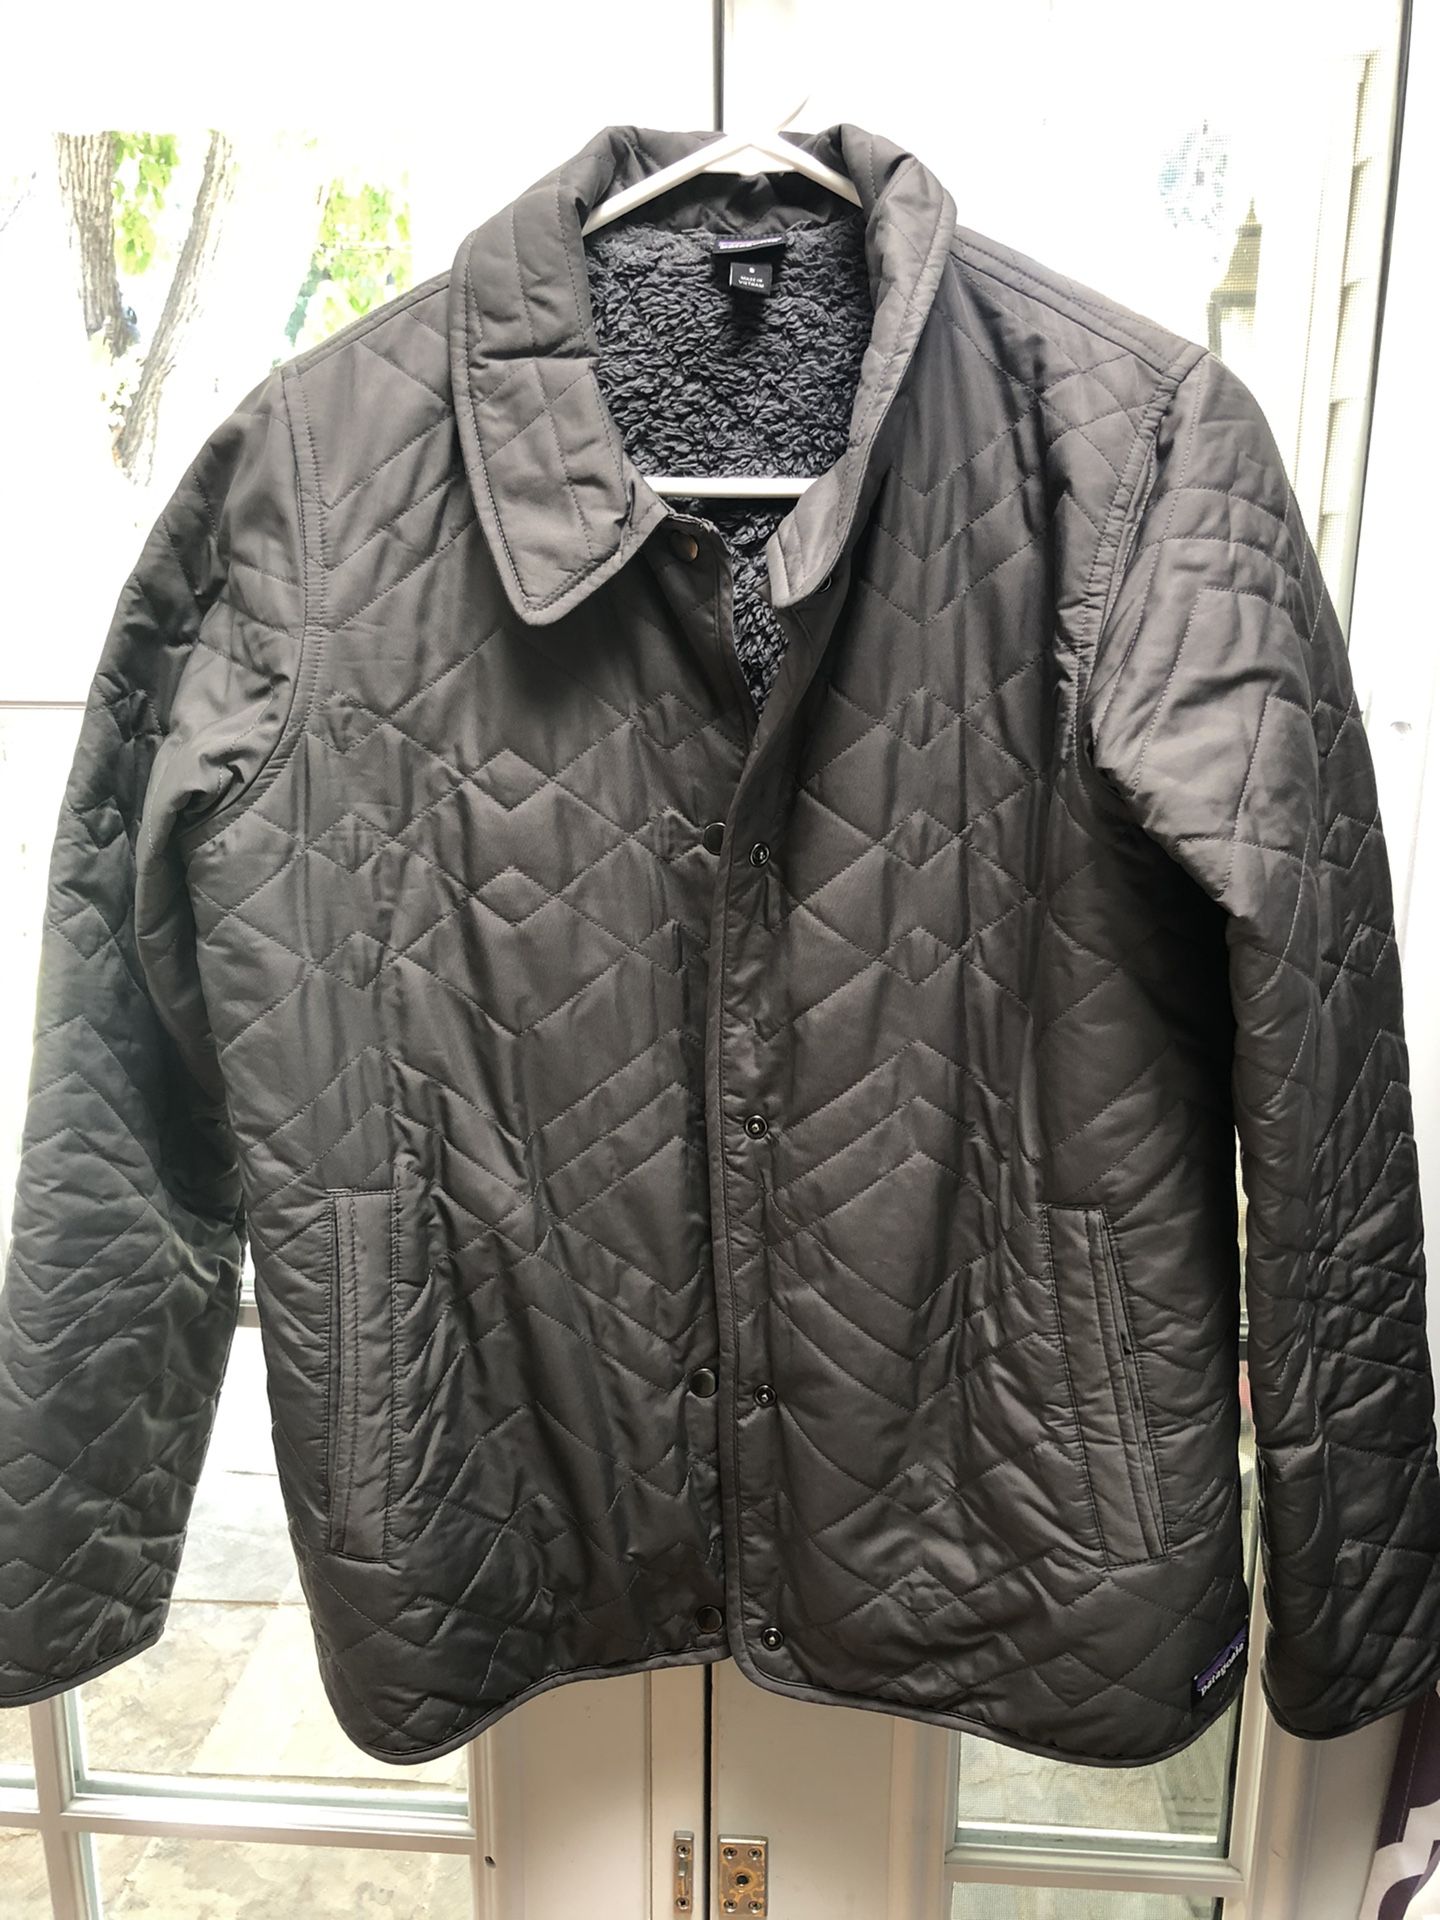 Patagonia Los Gatos quilted jacket size small